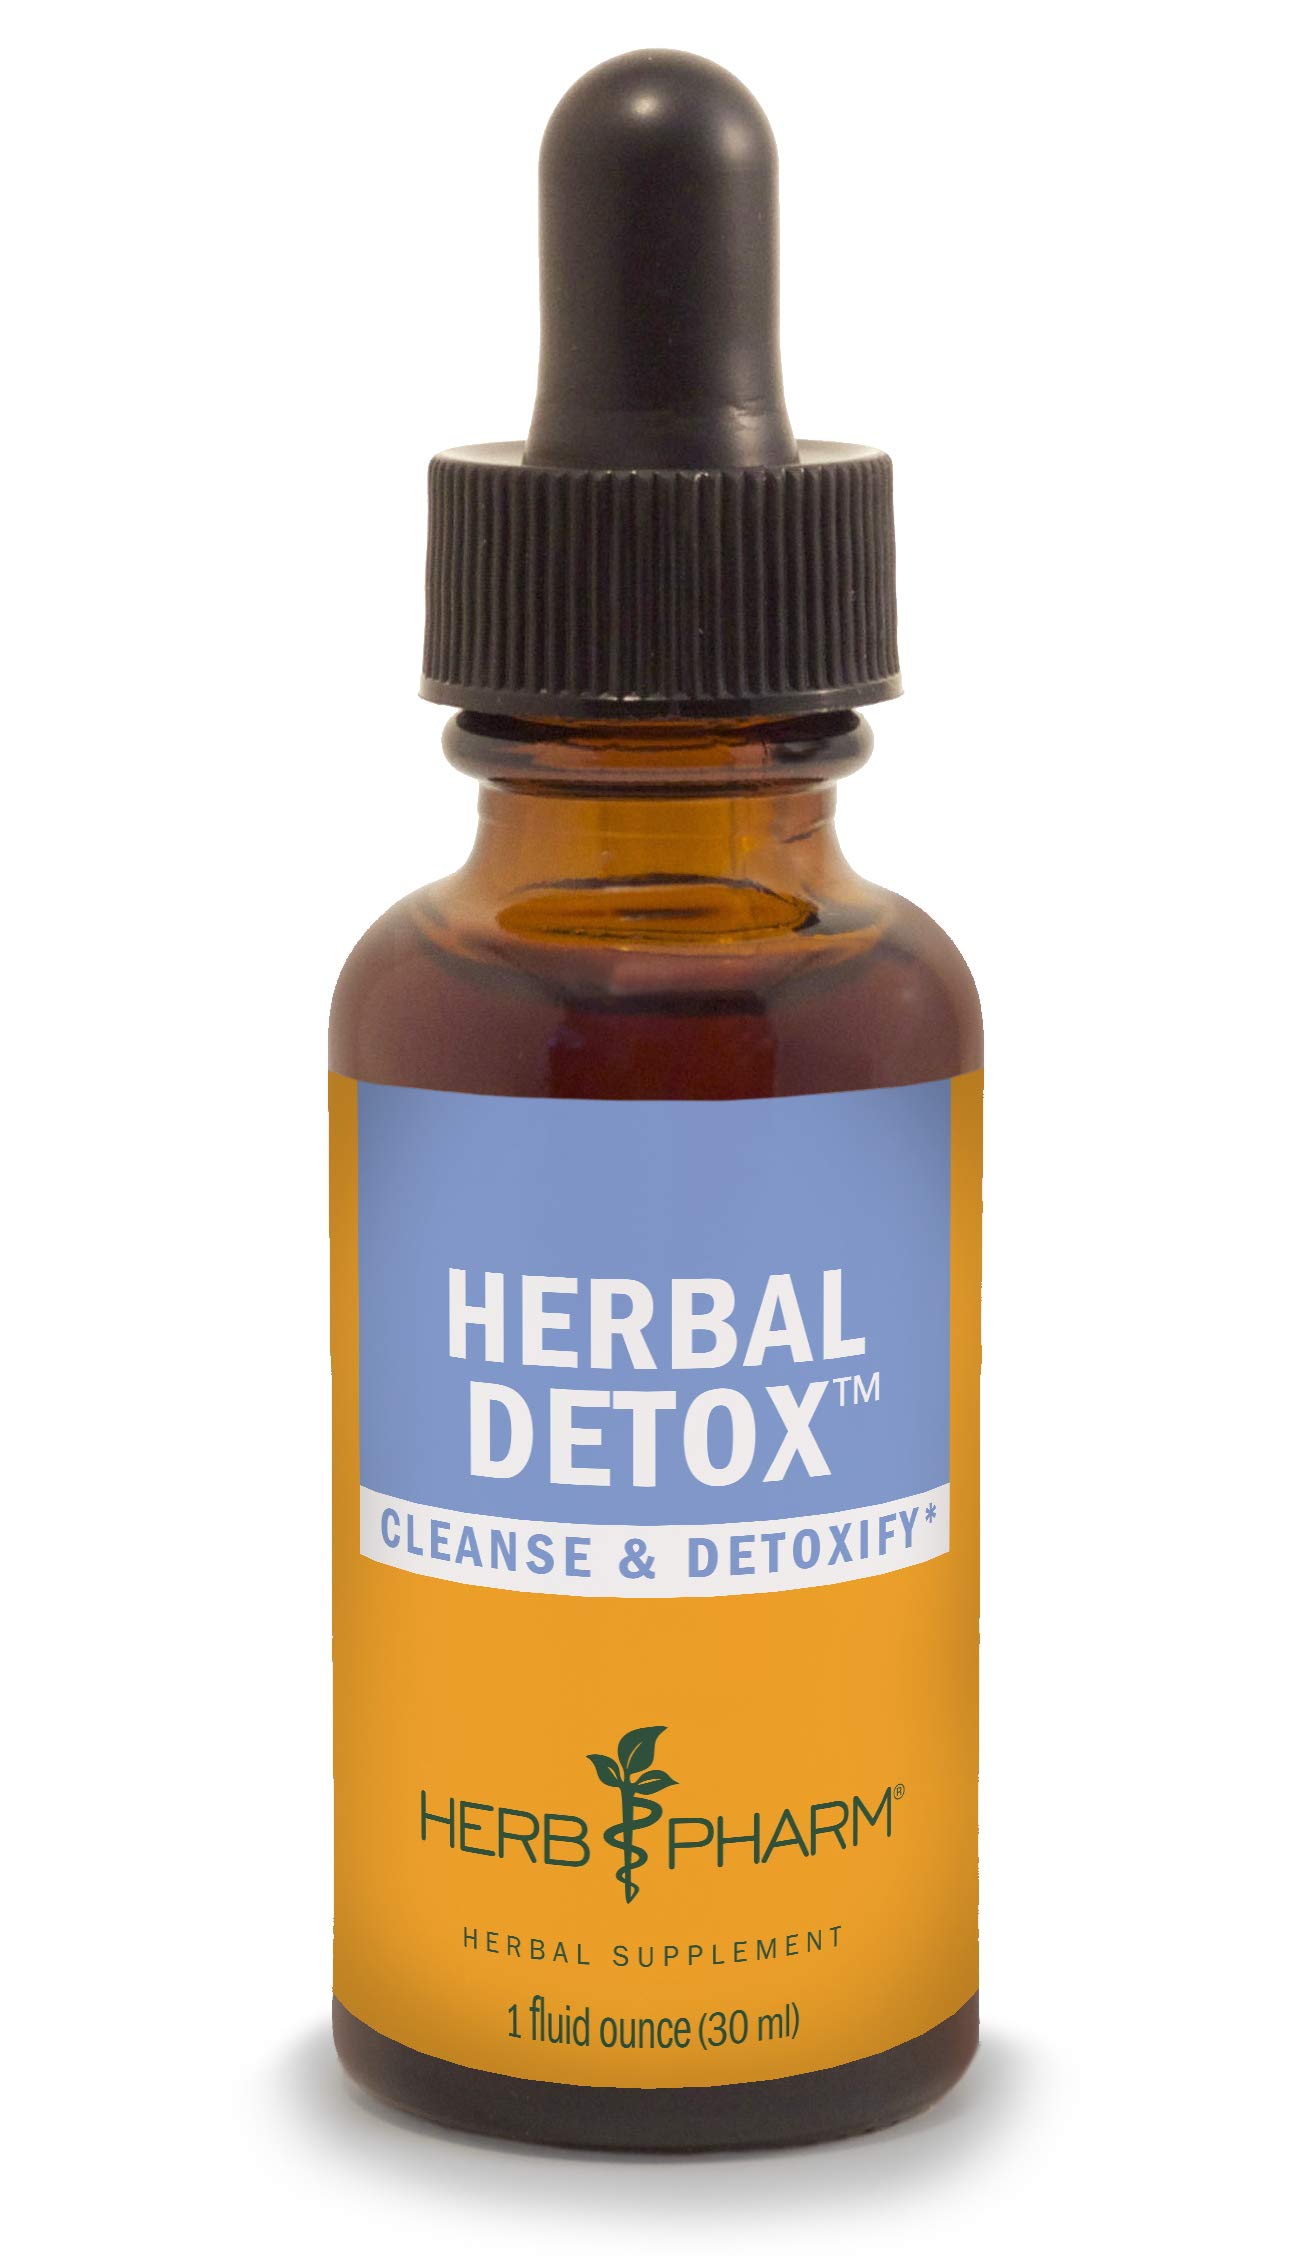 Herb Pharm Liquid Herbal Detox Formula for Cleansing and Detoxification - 1 Ounce